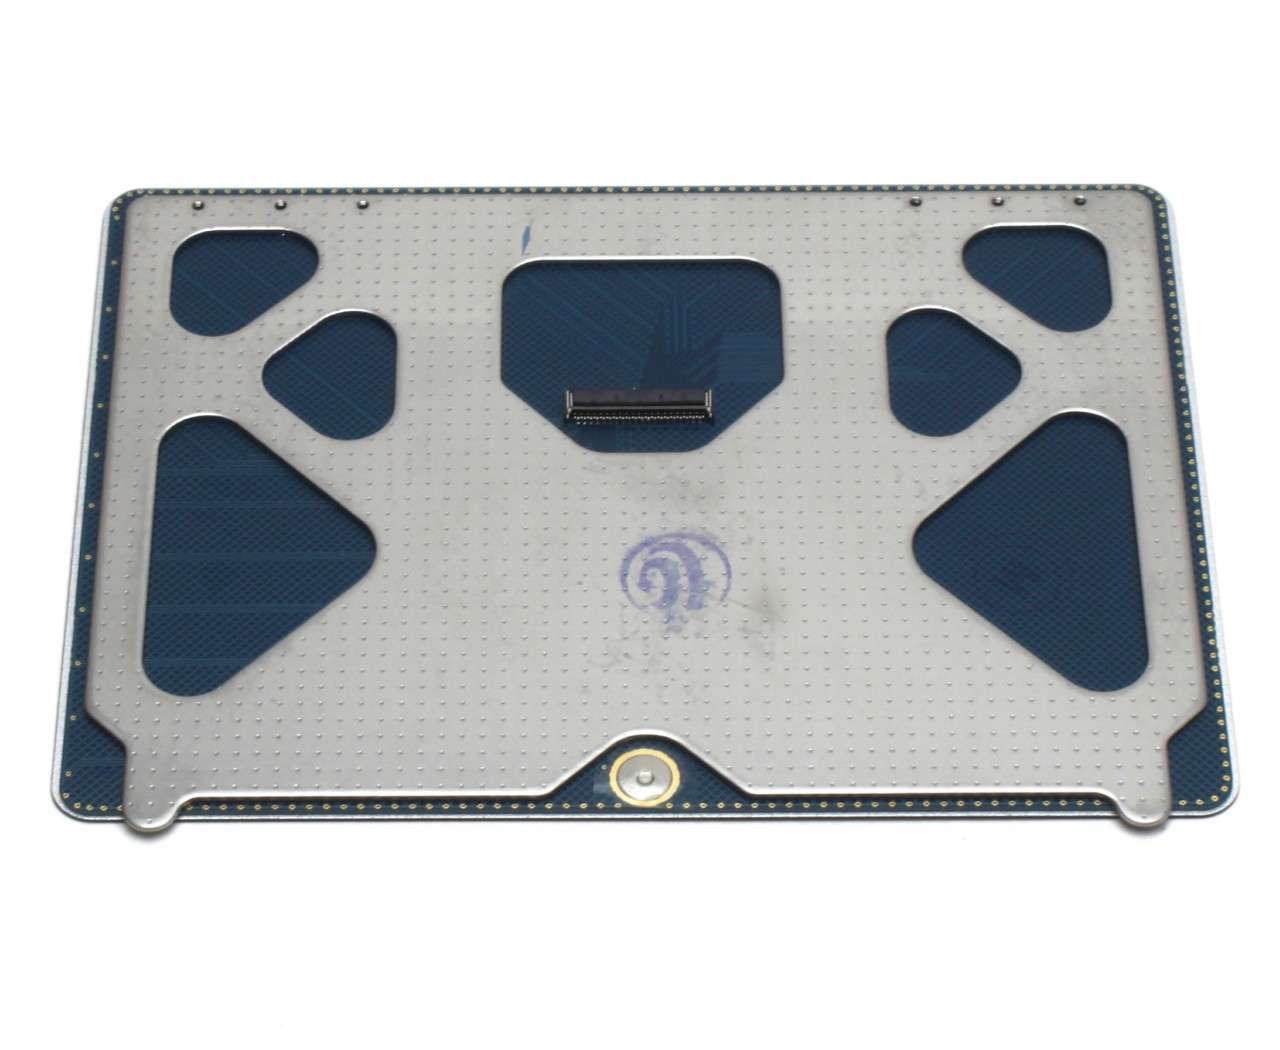 Touchpad Apple Macbook Pro 17 A1297 Early 2009 Trackpad image